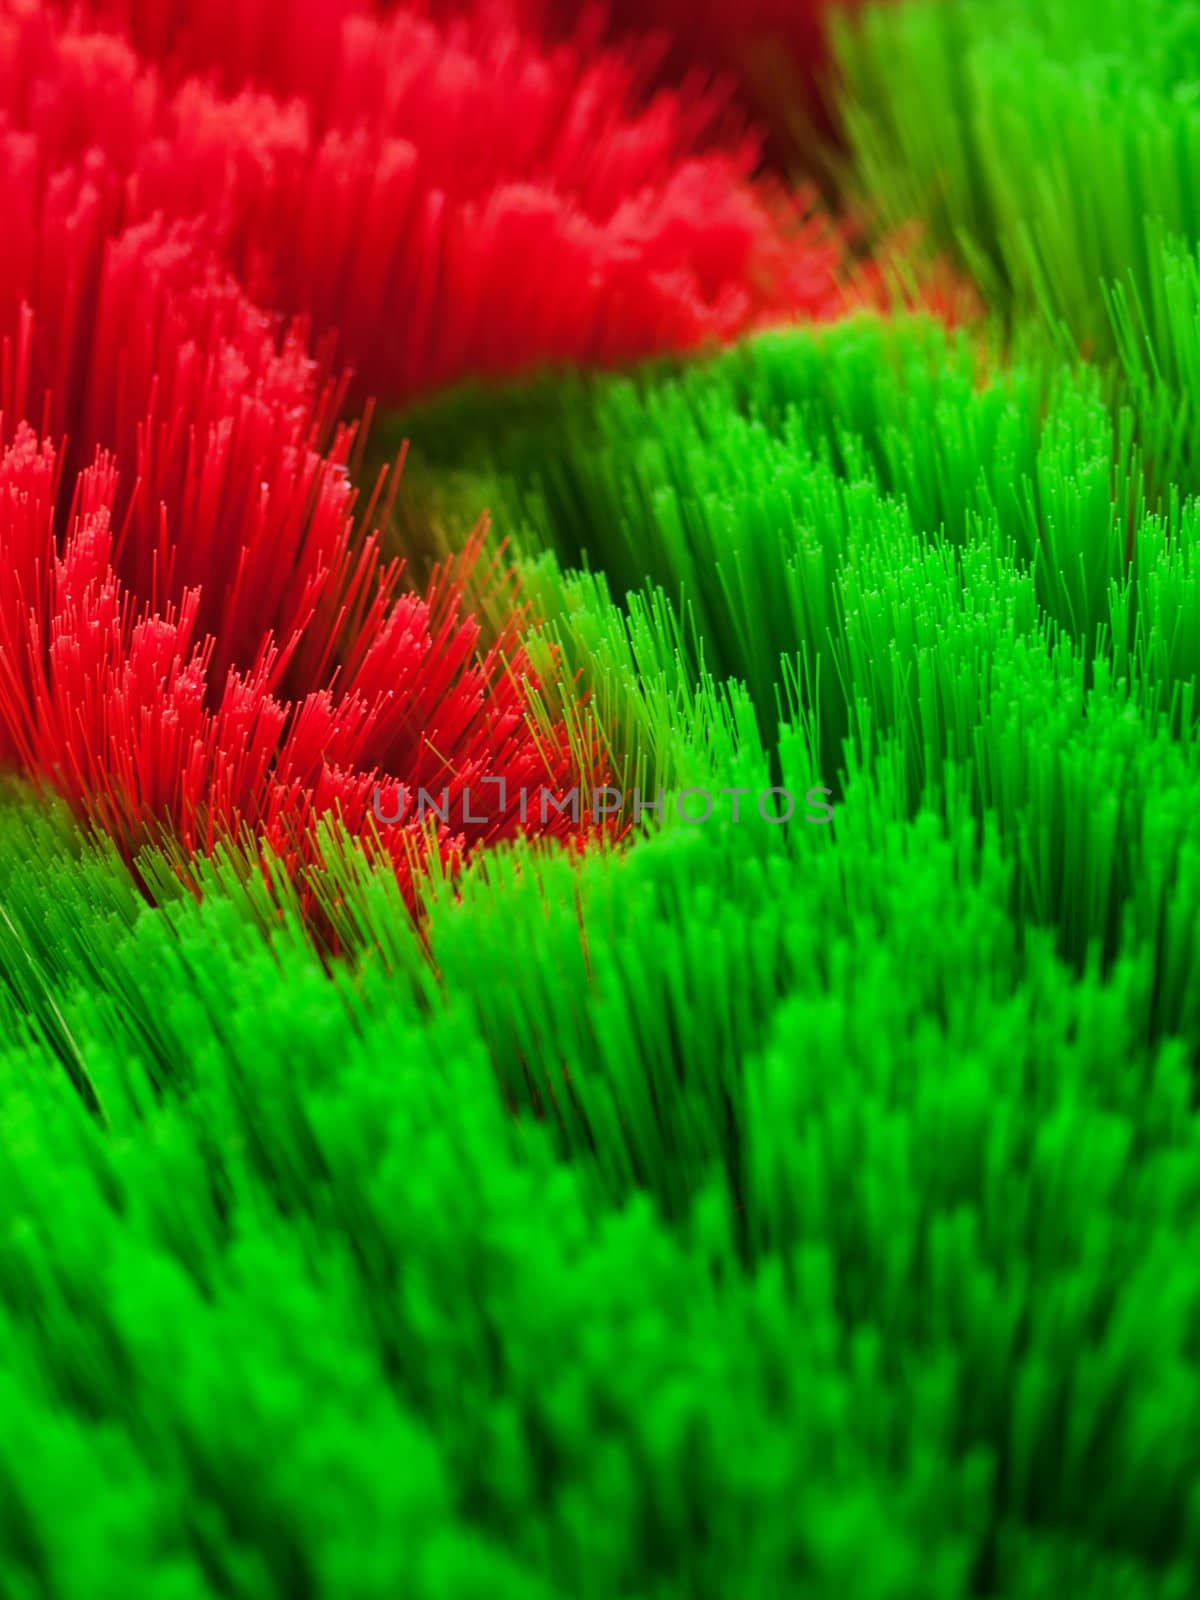 Macro of red and green cleaning brushes